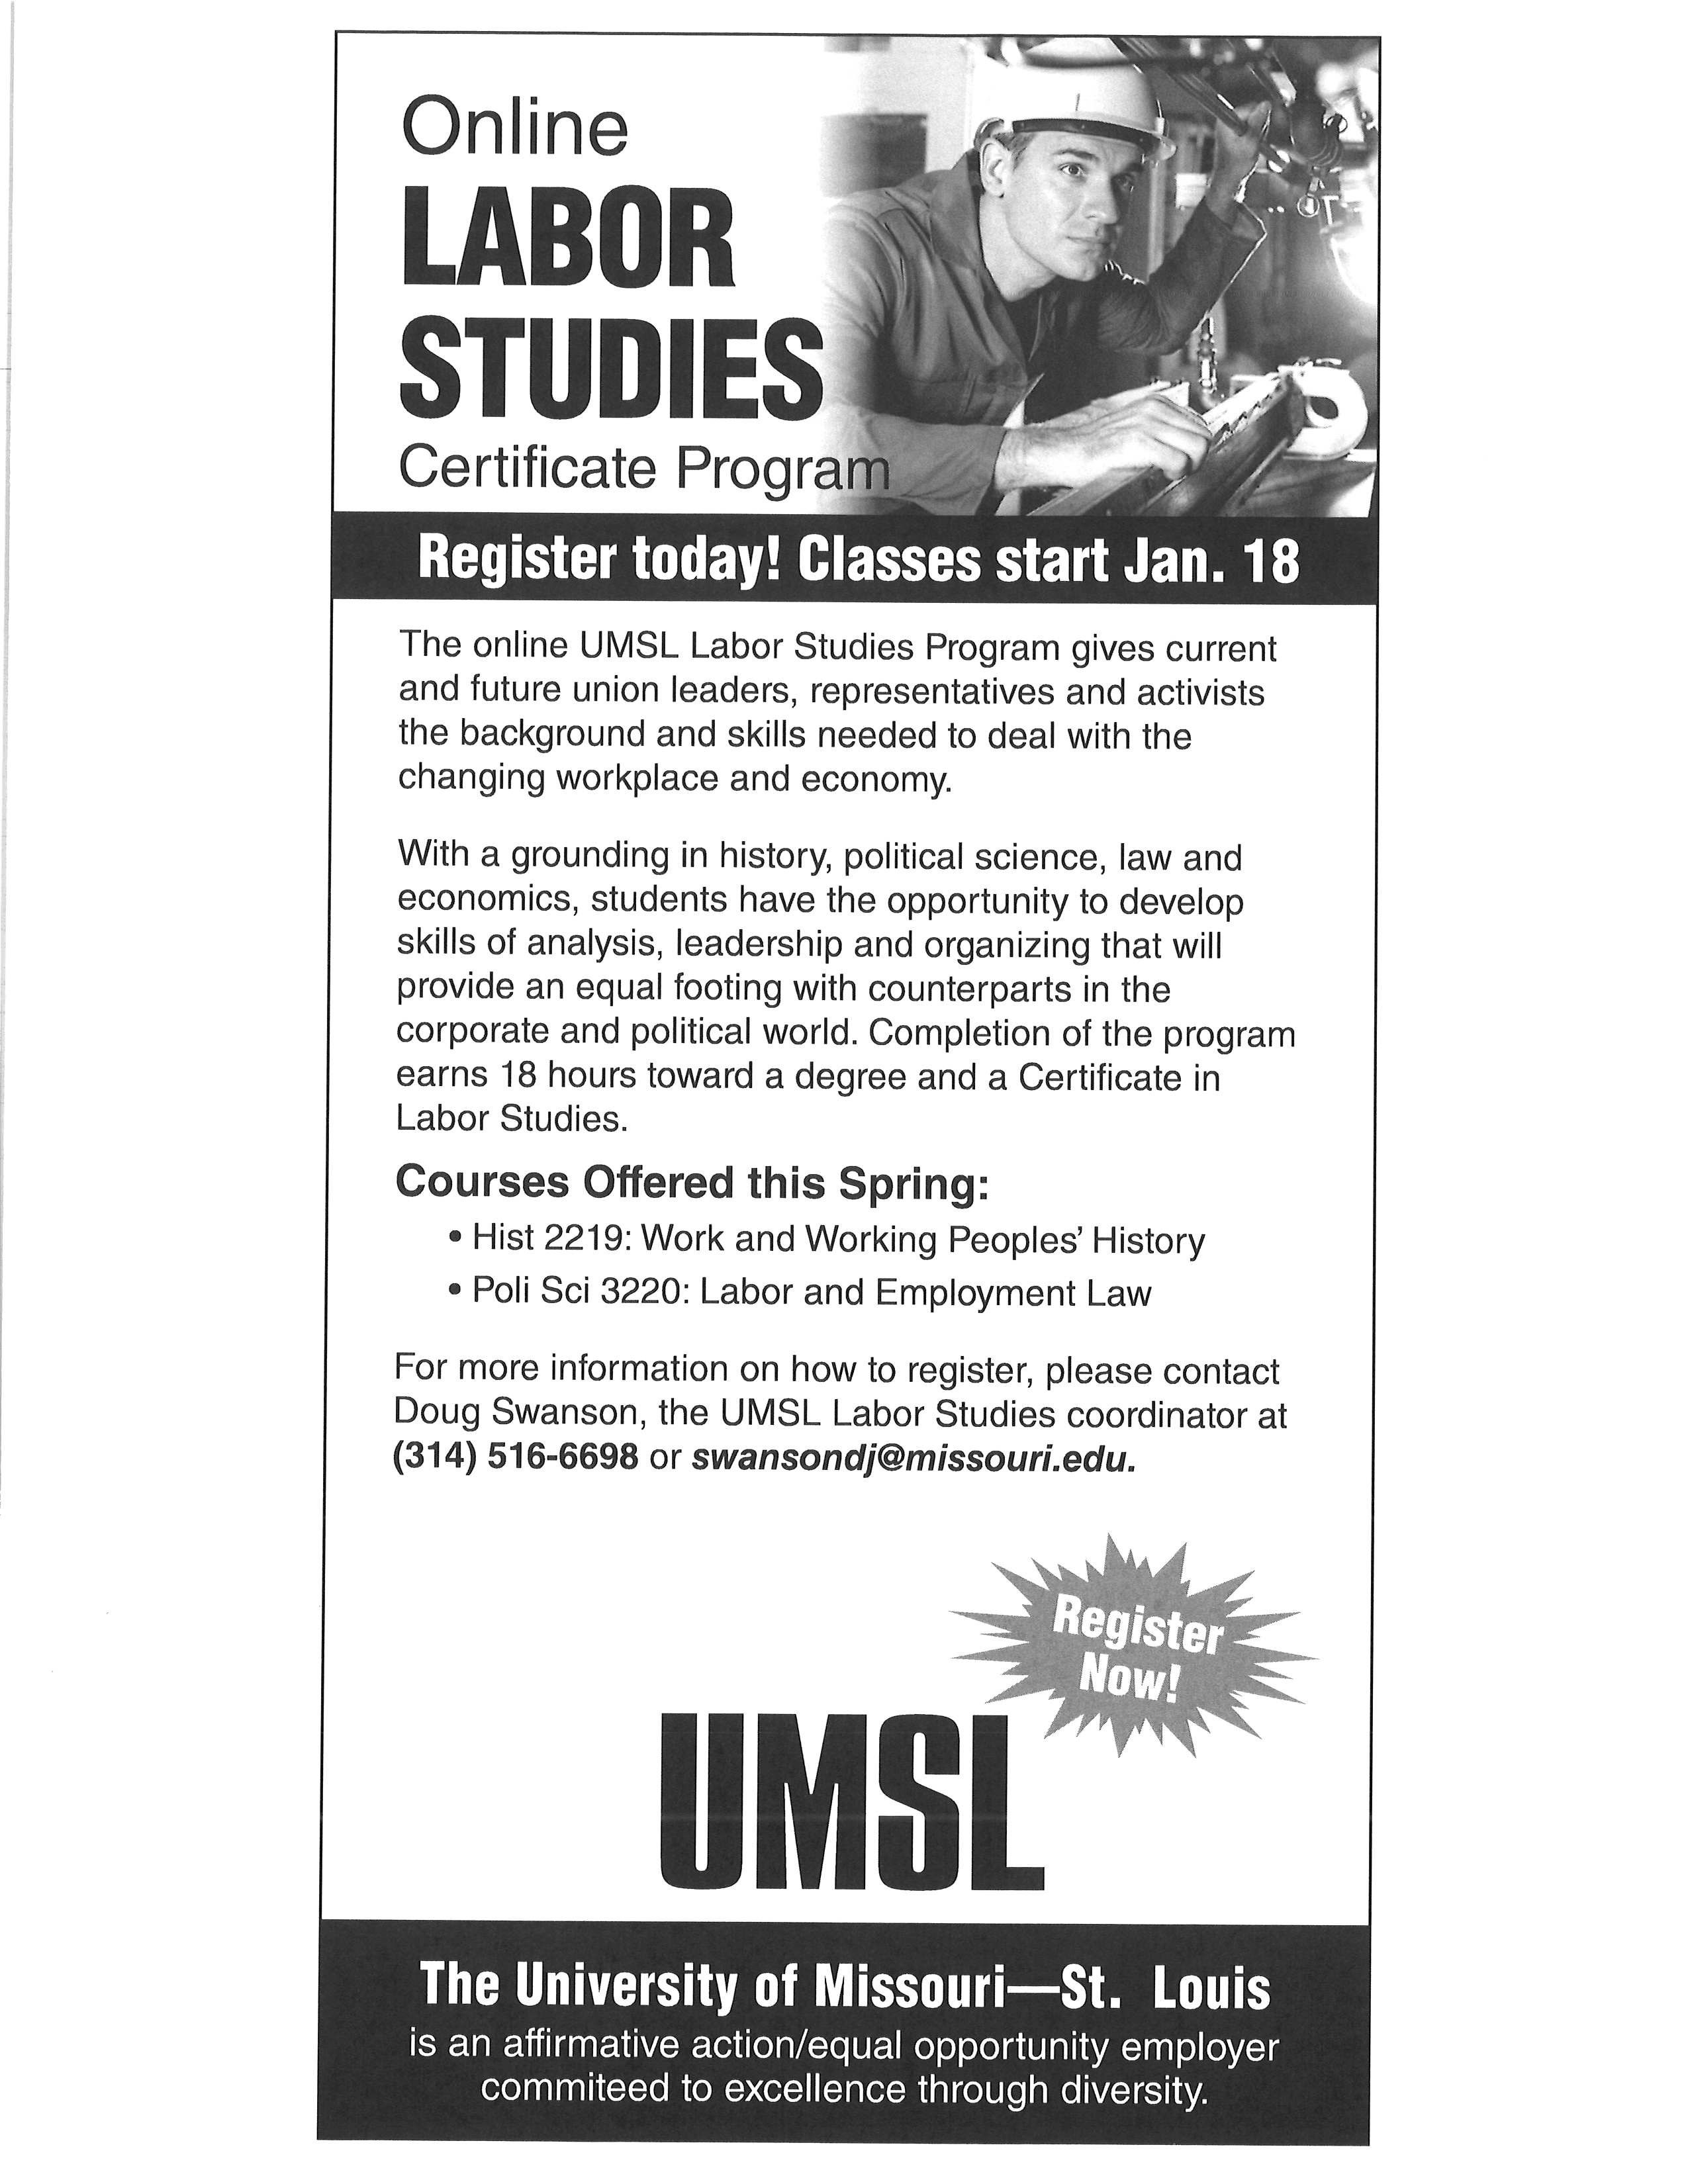 Want To Be A Union Leader?  Get Educated@UMSL